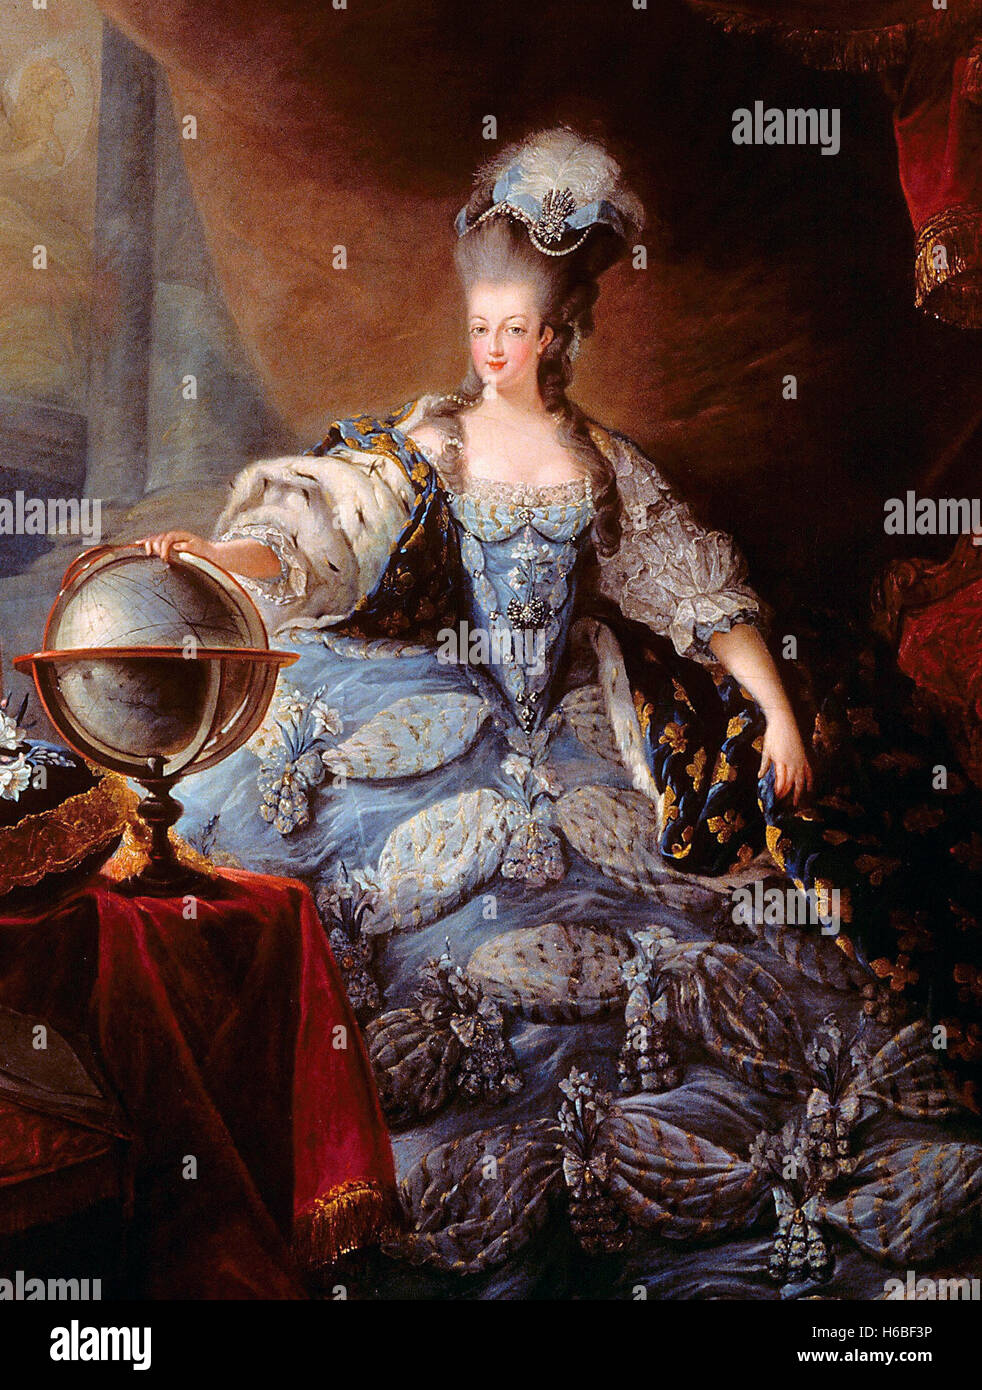 Marie Antoinette (1755-1793), Queen of France and wife of King Louis Stock Photo: 124413850 - Alamy